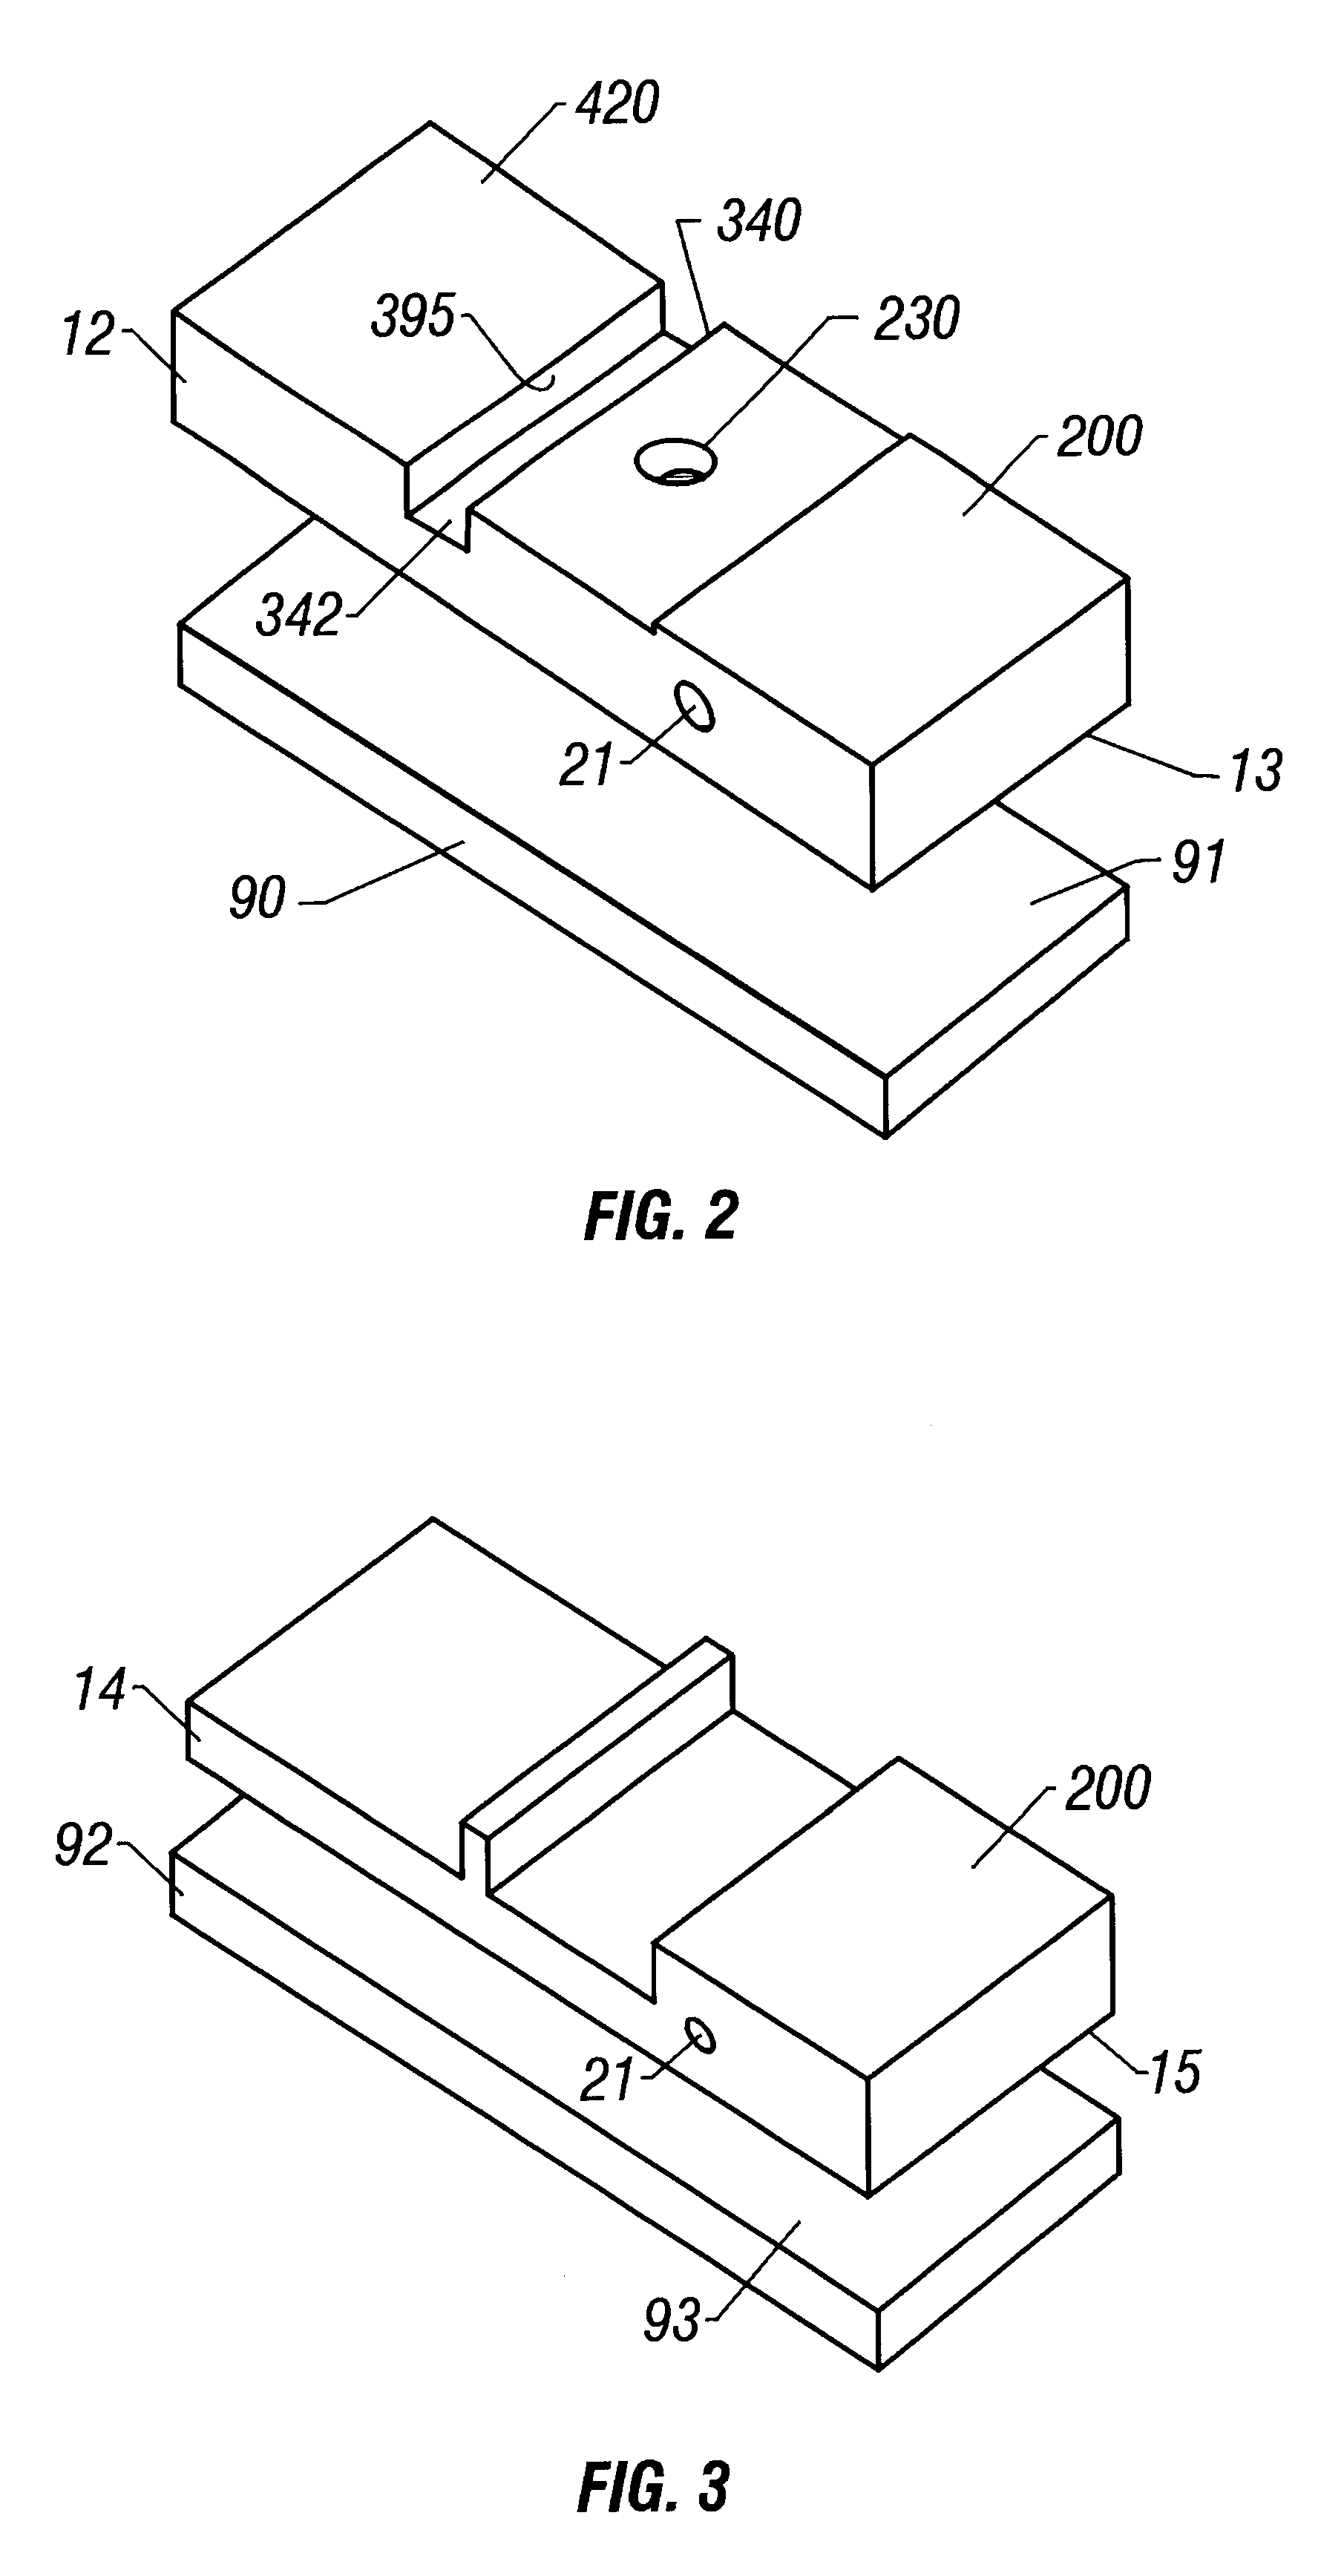 Laser assembly platform with silicon base